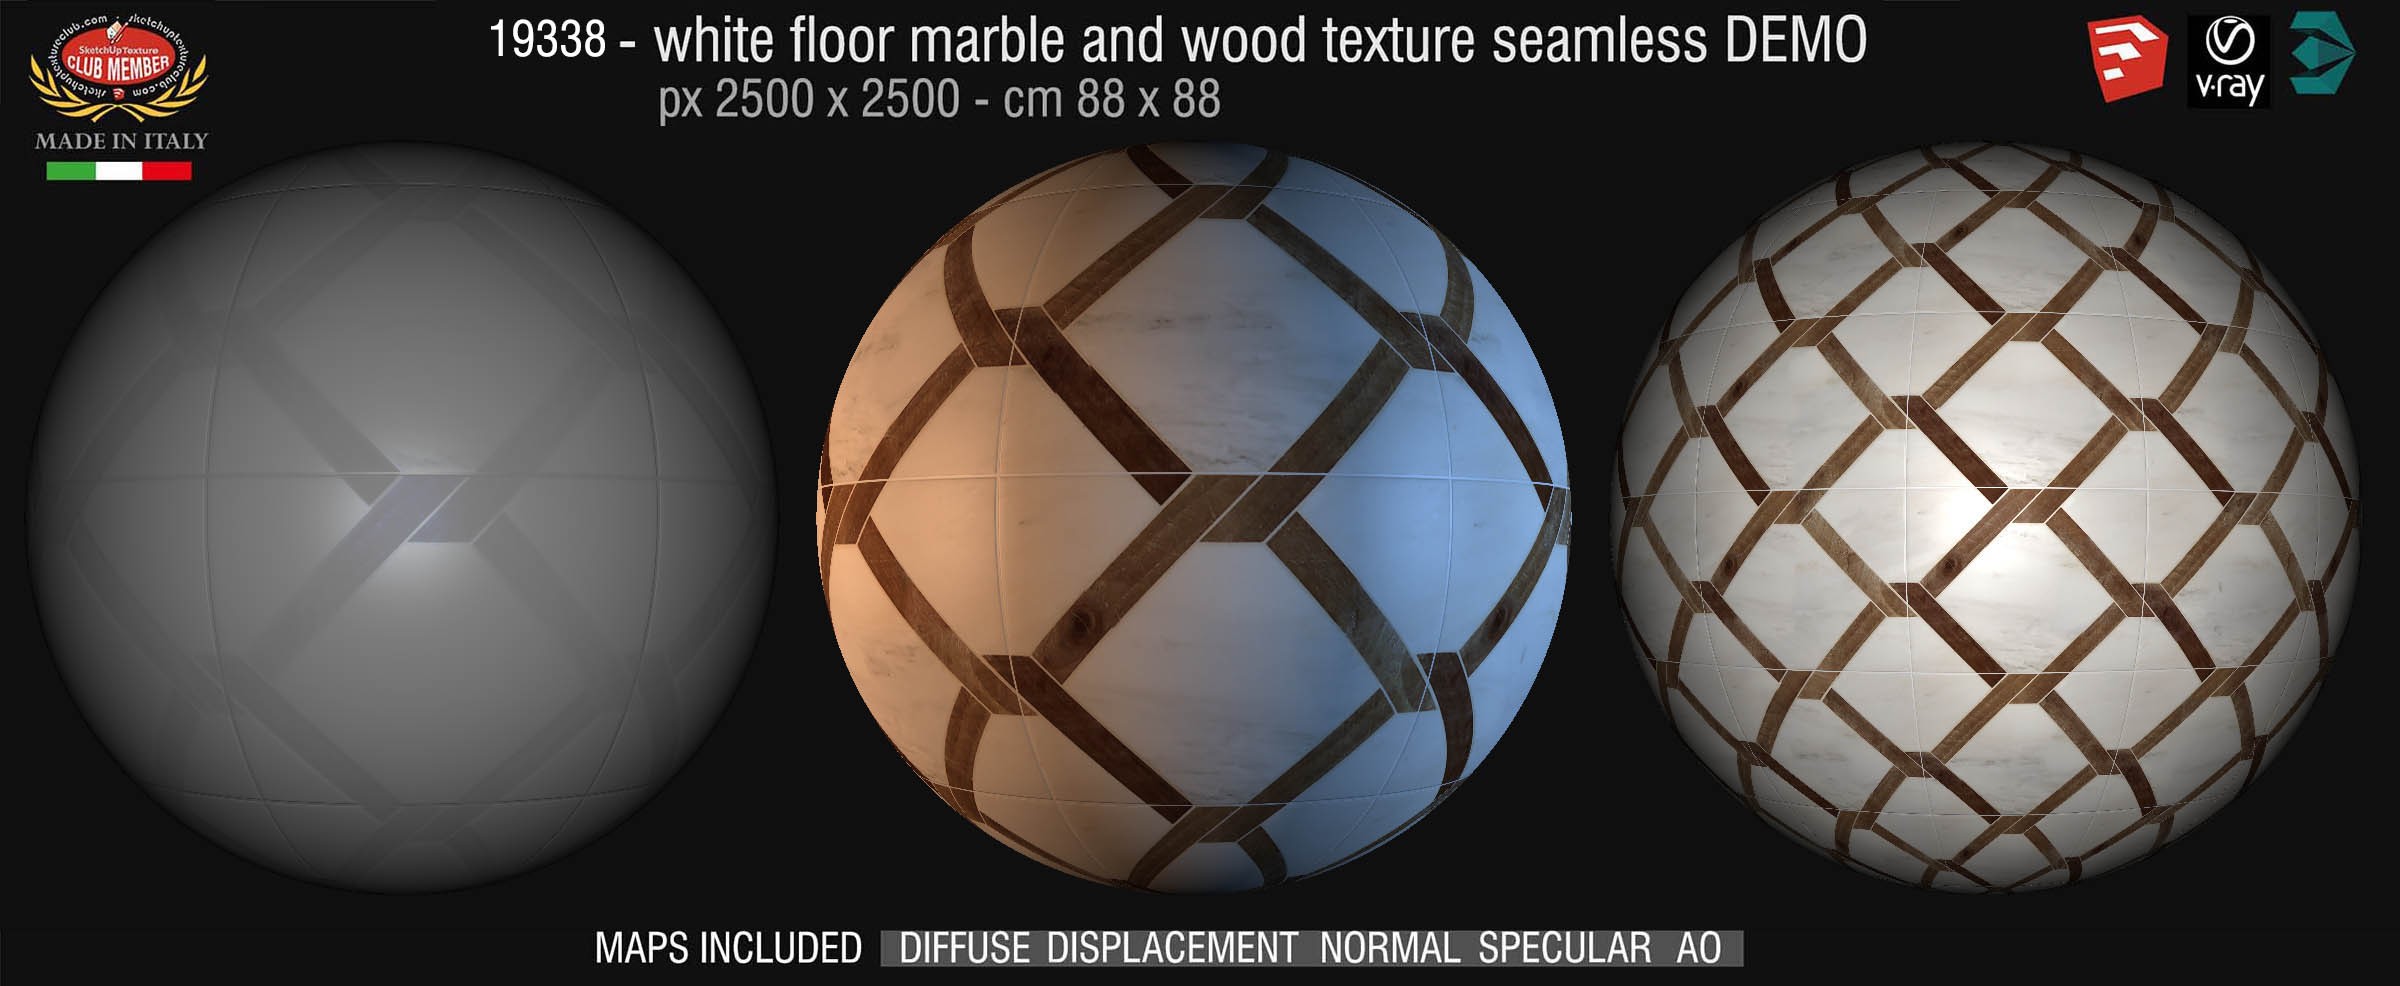 19338 White floor marble and wood geometric pattern texture seamless + maps DEMO